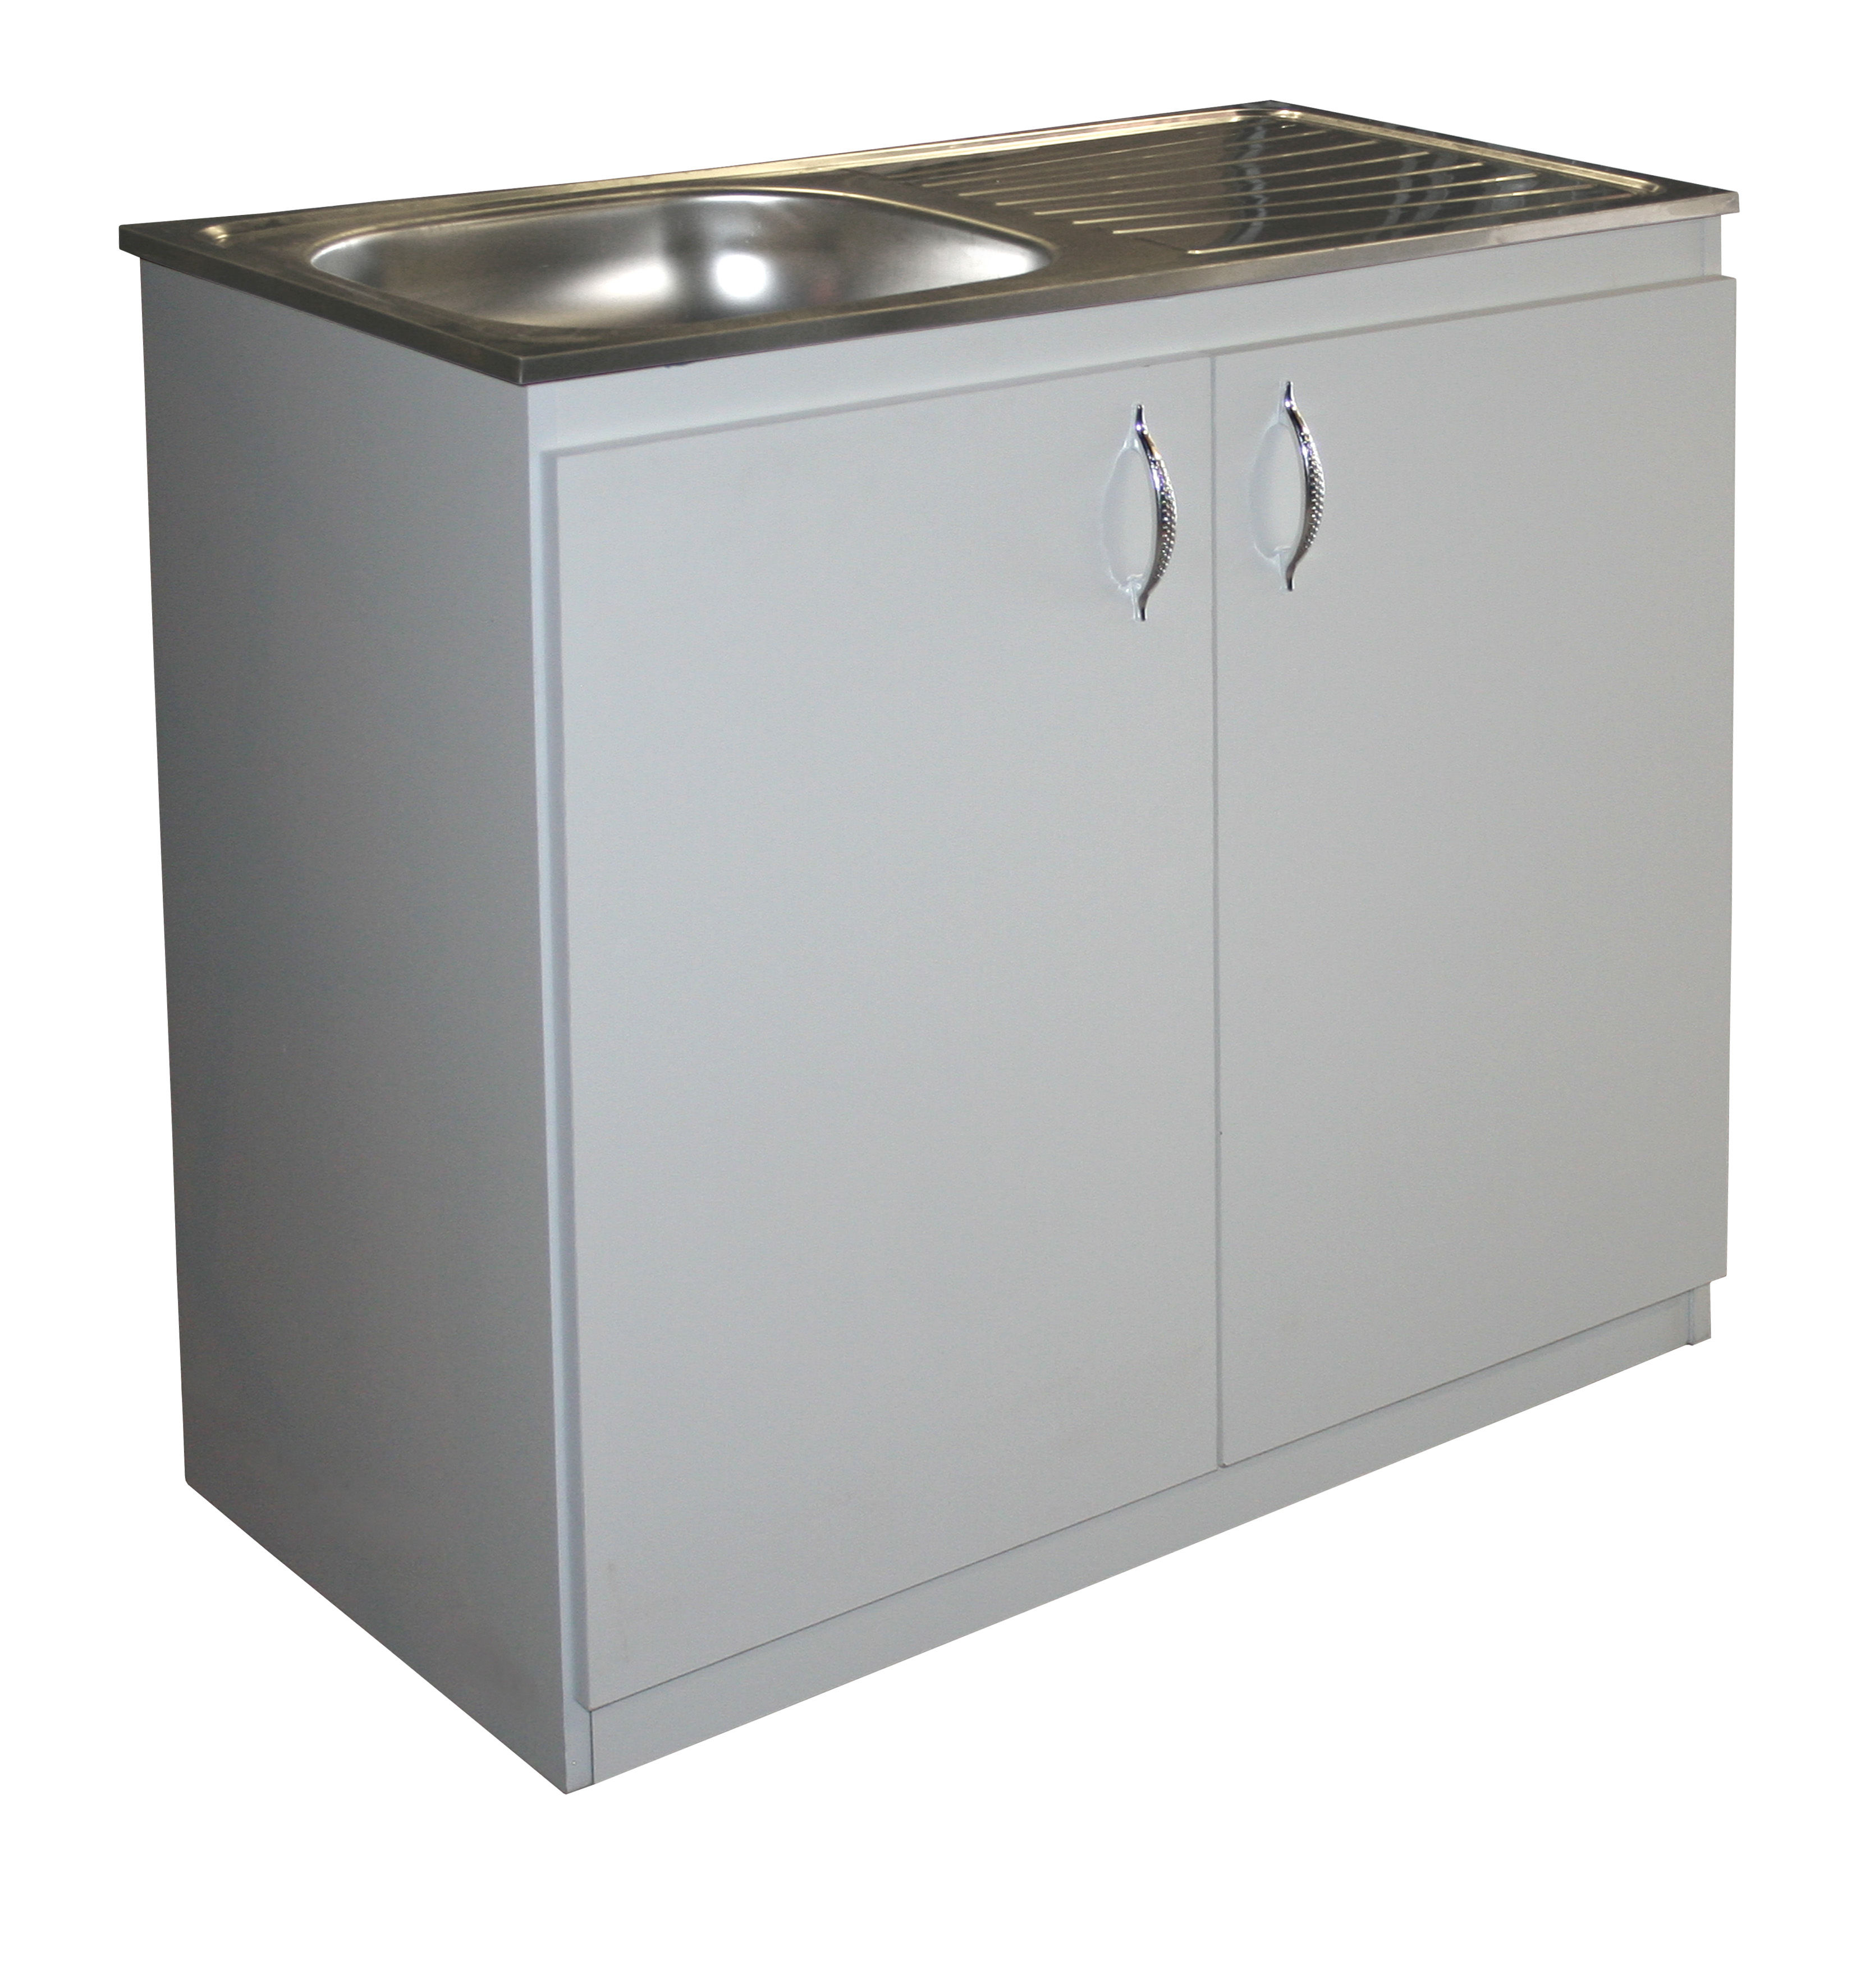 Sink Cabinet with stainless steel sink